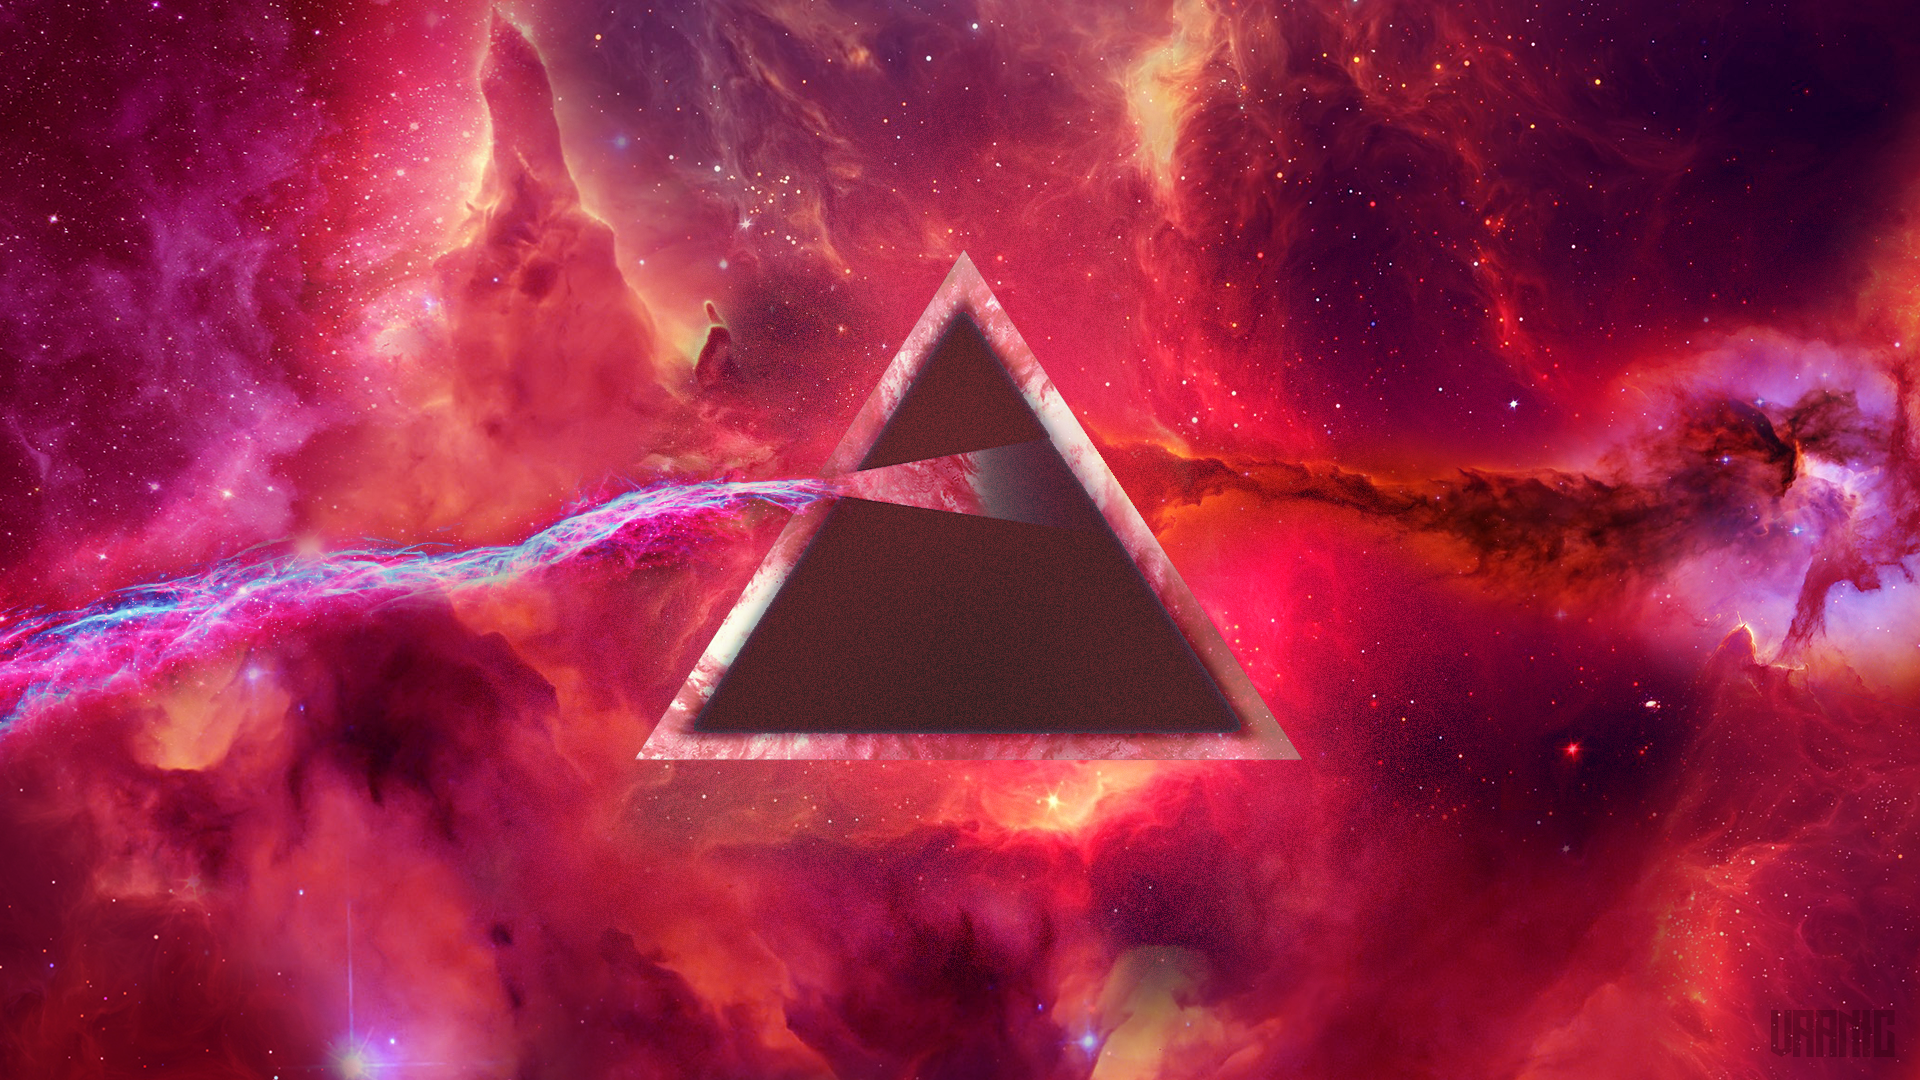 General 1920x1080 Pink Floyd The Dark Side of the Moon Andromeda classic rock red triangle space art music geometric figures